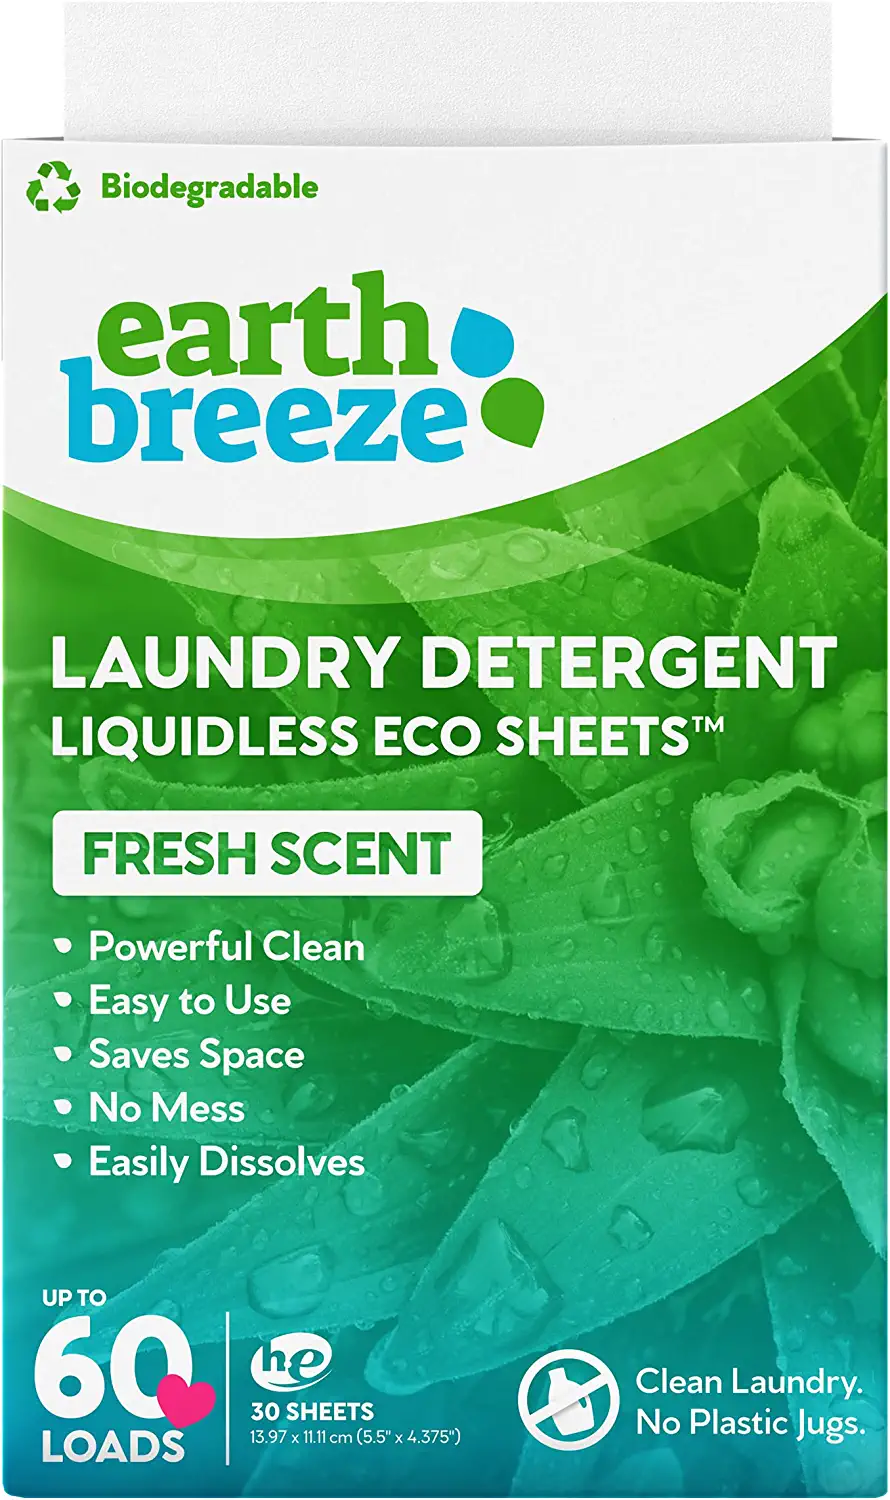 Earth Breeze Easy Dissolve Laundry Detergent Sheets, 30-Pack